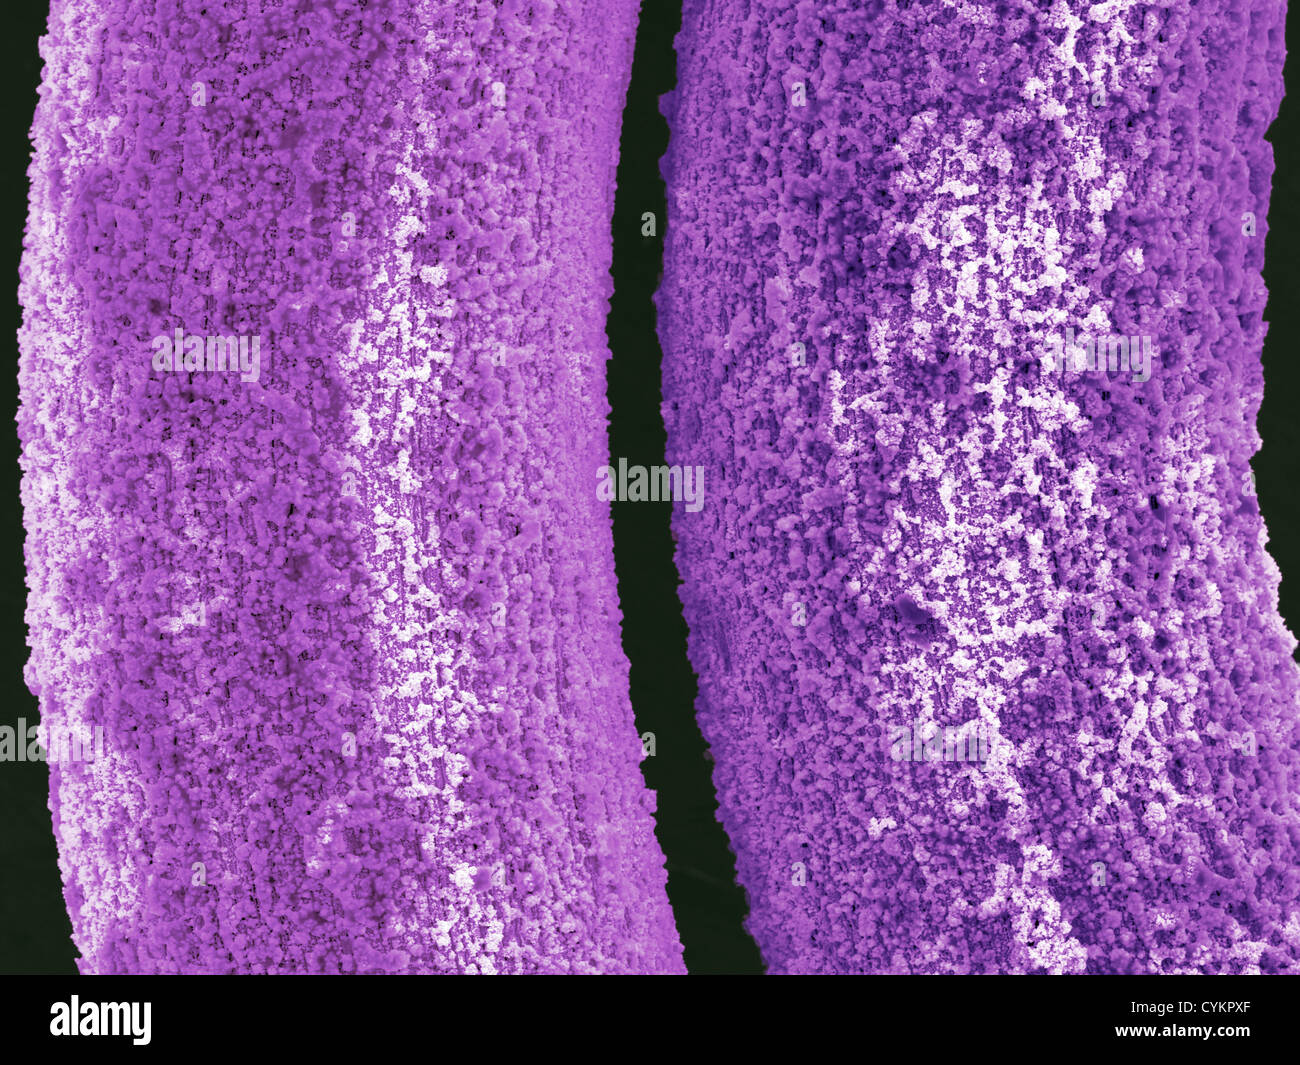 SEM of chemically deposited Antimony on metallic substrate (closer view) Stock Photo